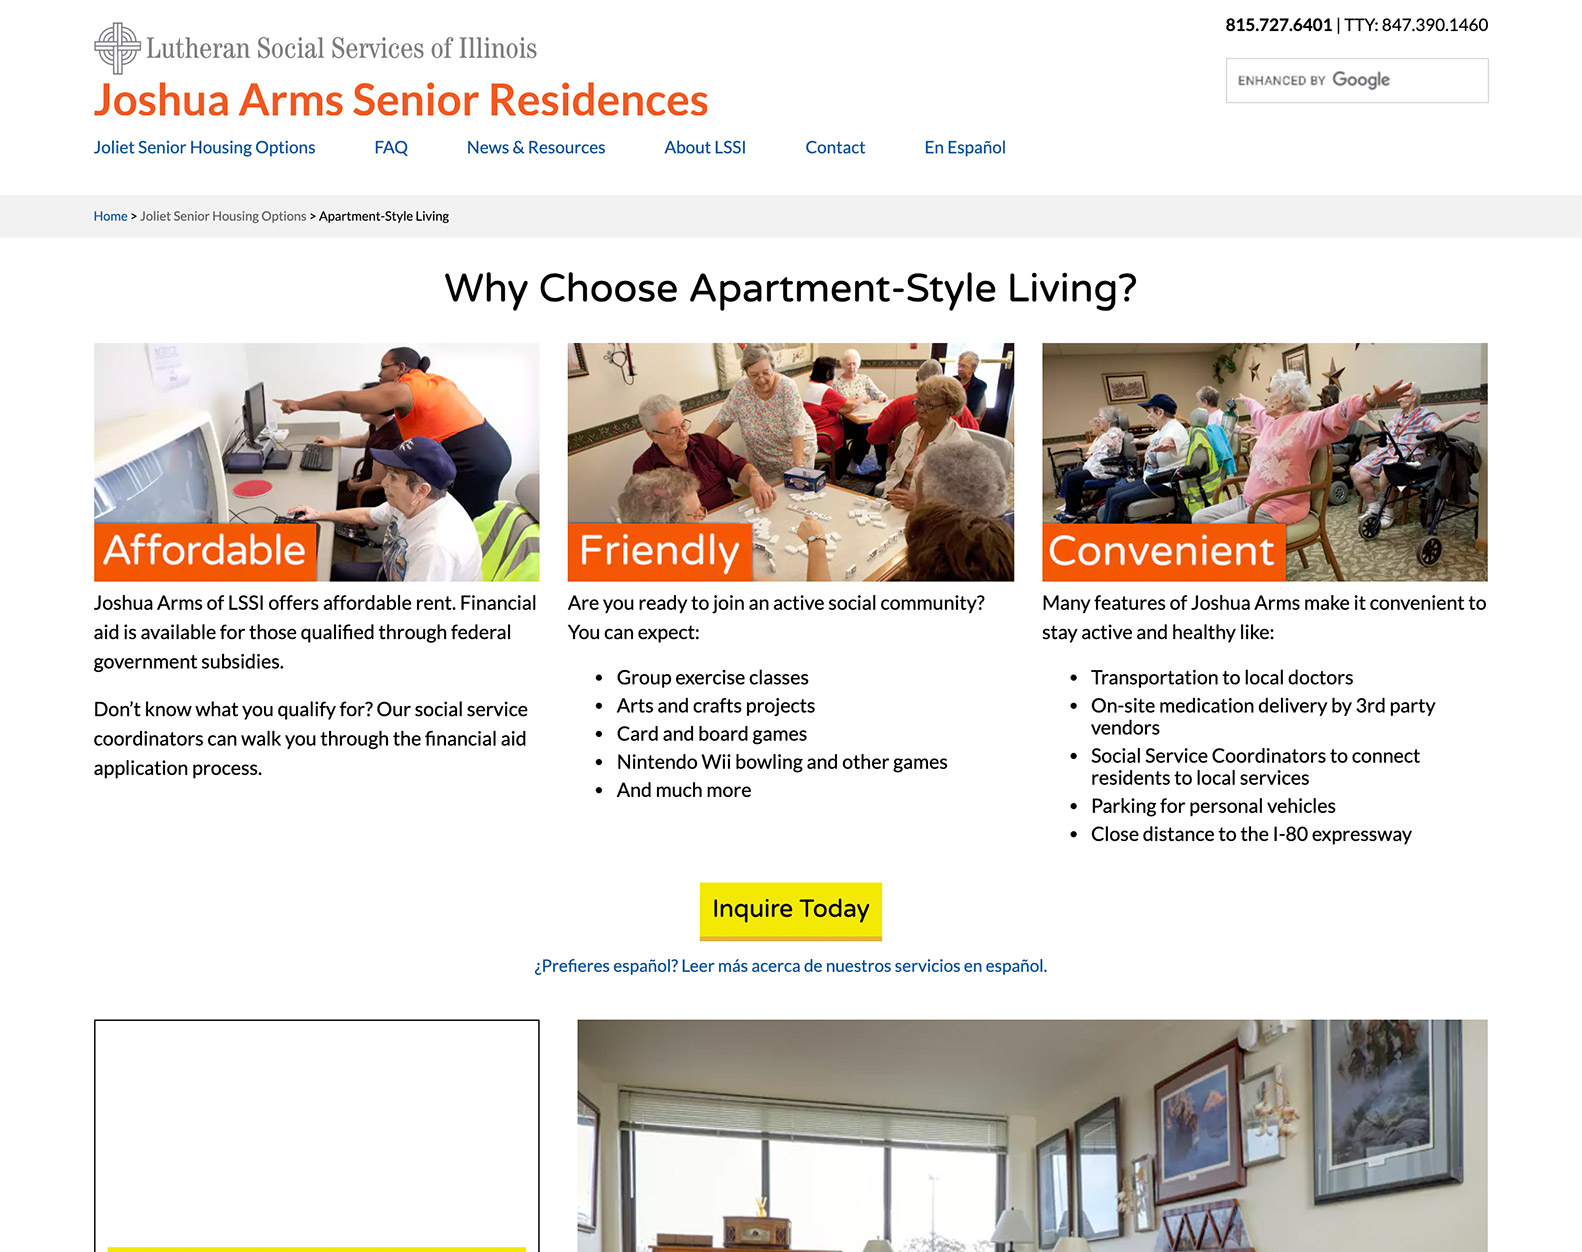 Click here to view a screenshot of Joshua Arms: Apartment-Style Living Page - Desktop